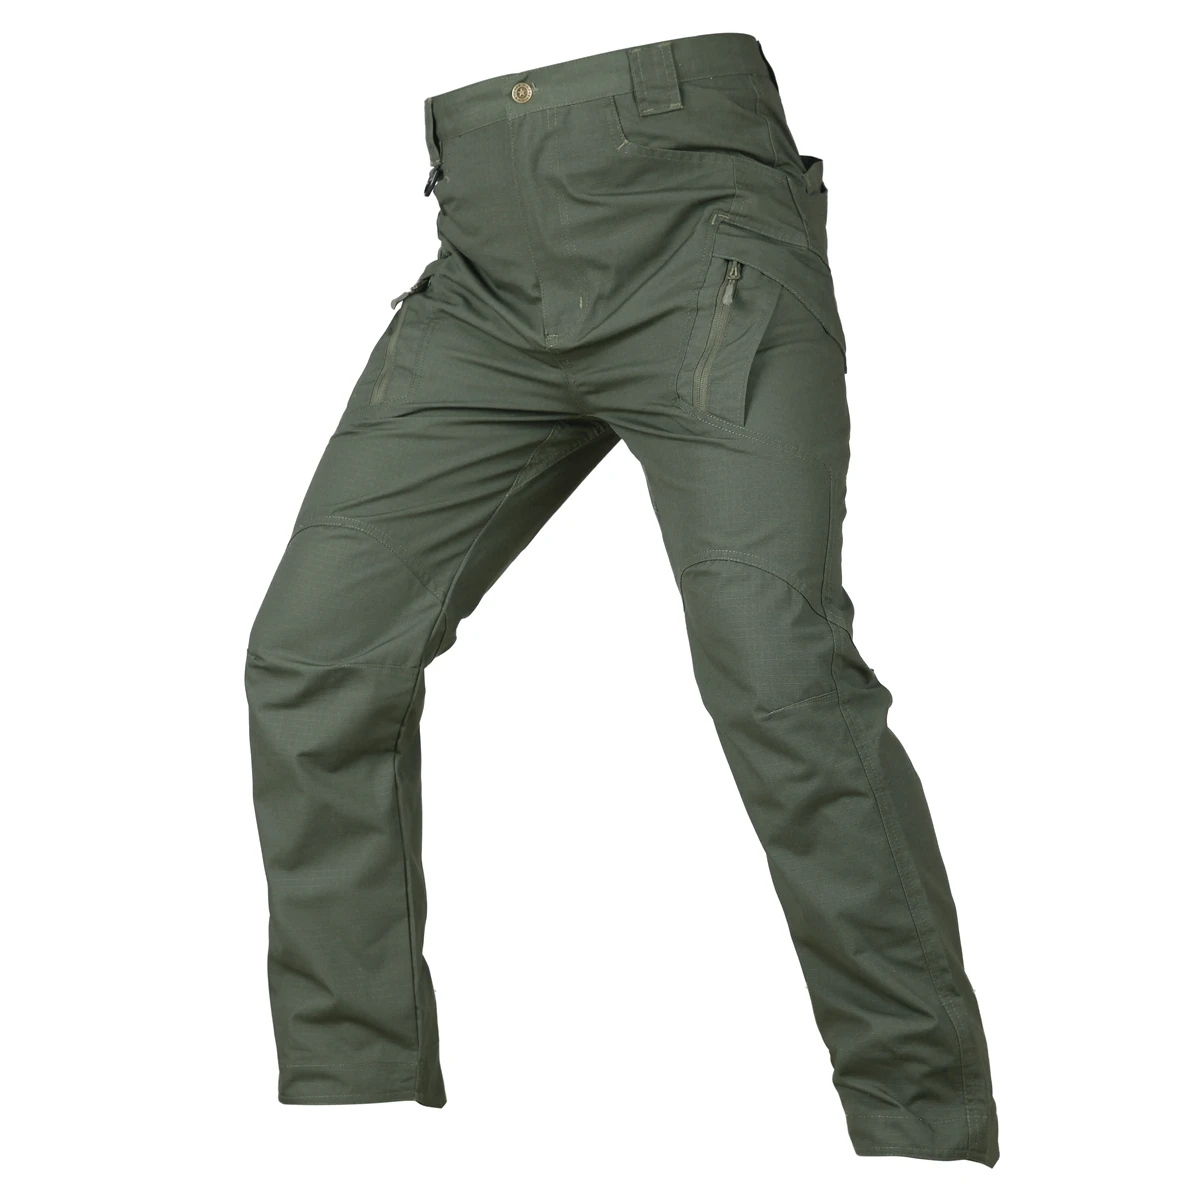 

Outdoor Multi Pockets Army Trousers Military Combat Tactical Hunting Cargo Pants, Fg, au, acu, cp, digital dersert, olive green, black, tri-color desert